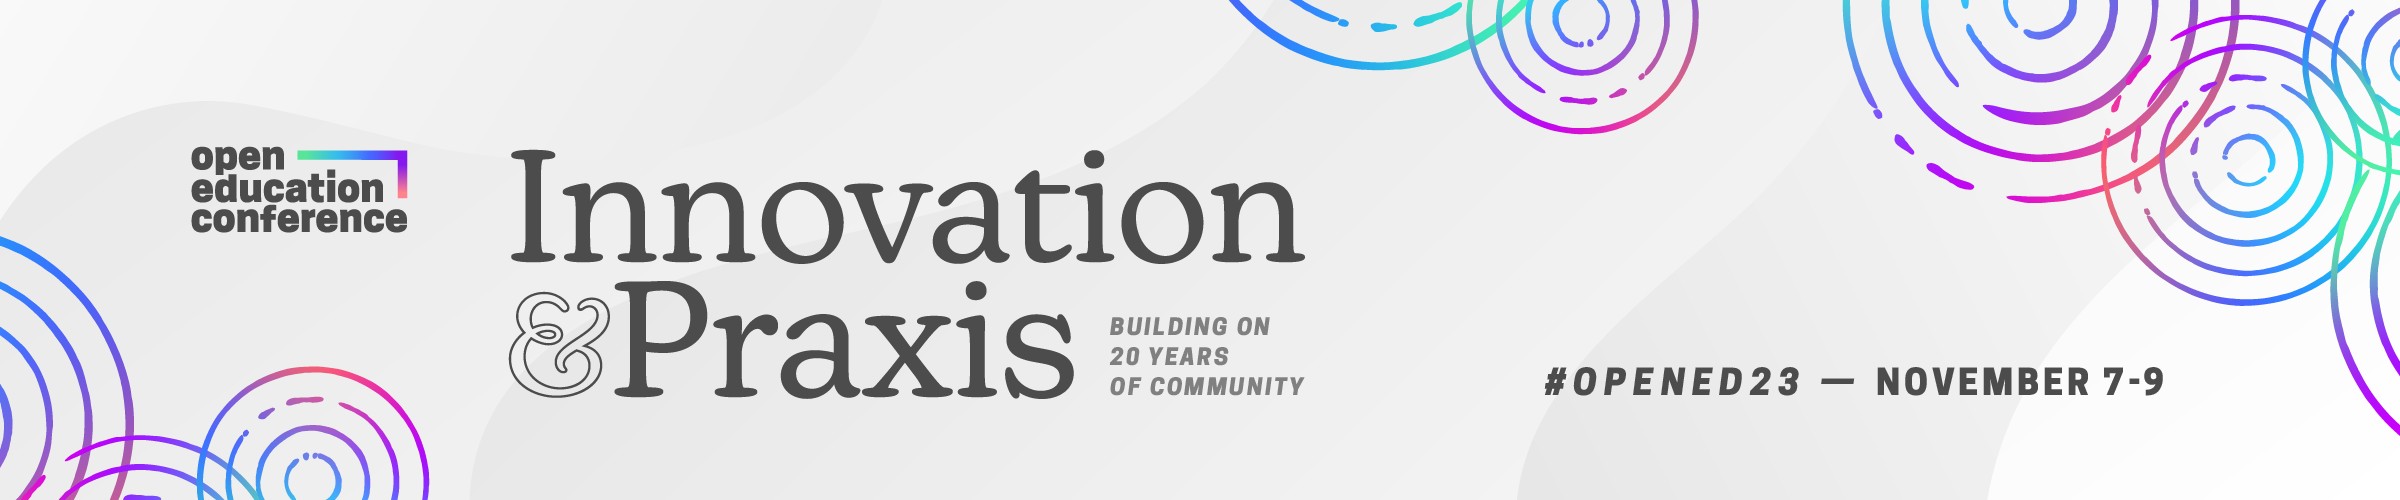 Open Education Conference. Innovation & Praxis: Building on 20 year of community. #opened23, November 7–9.